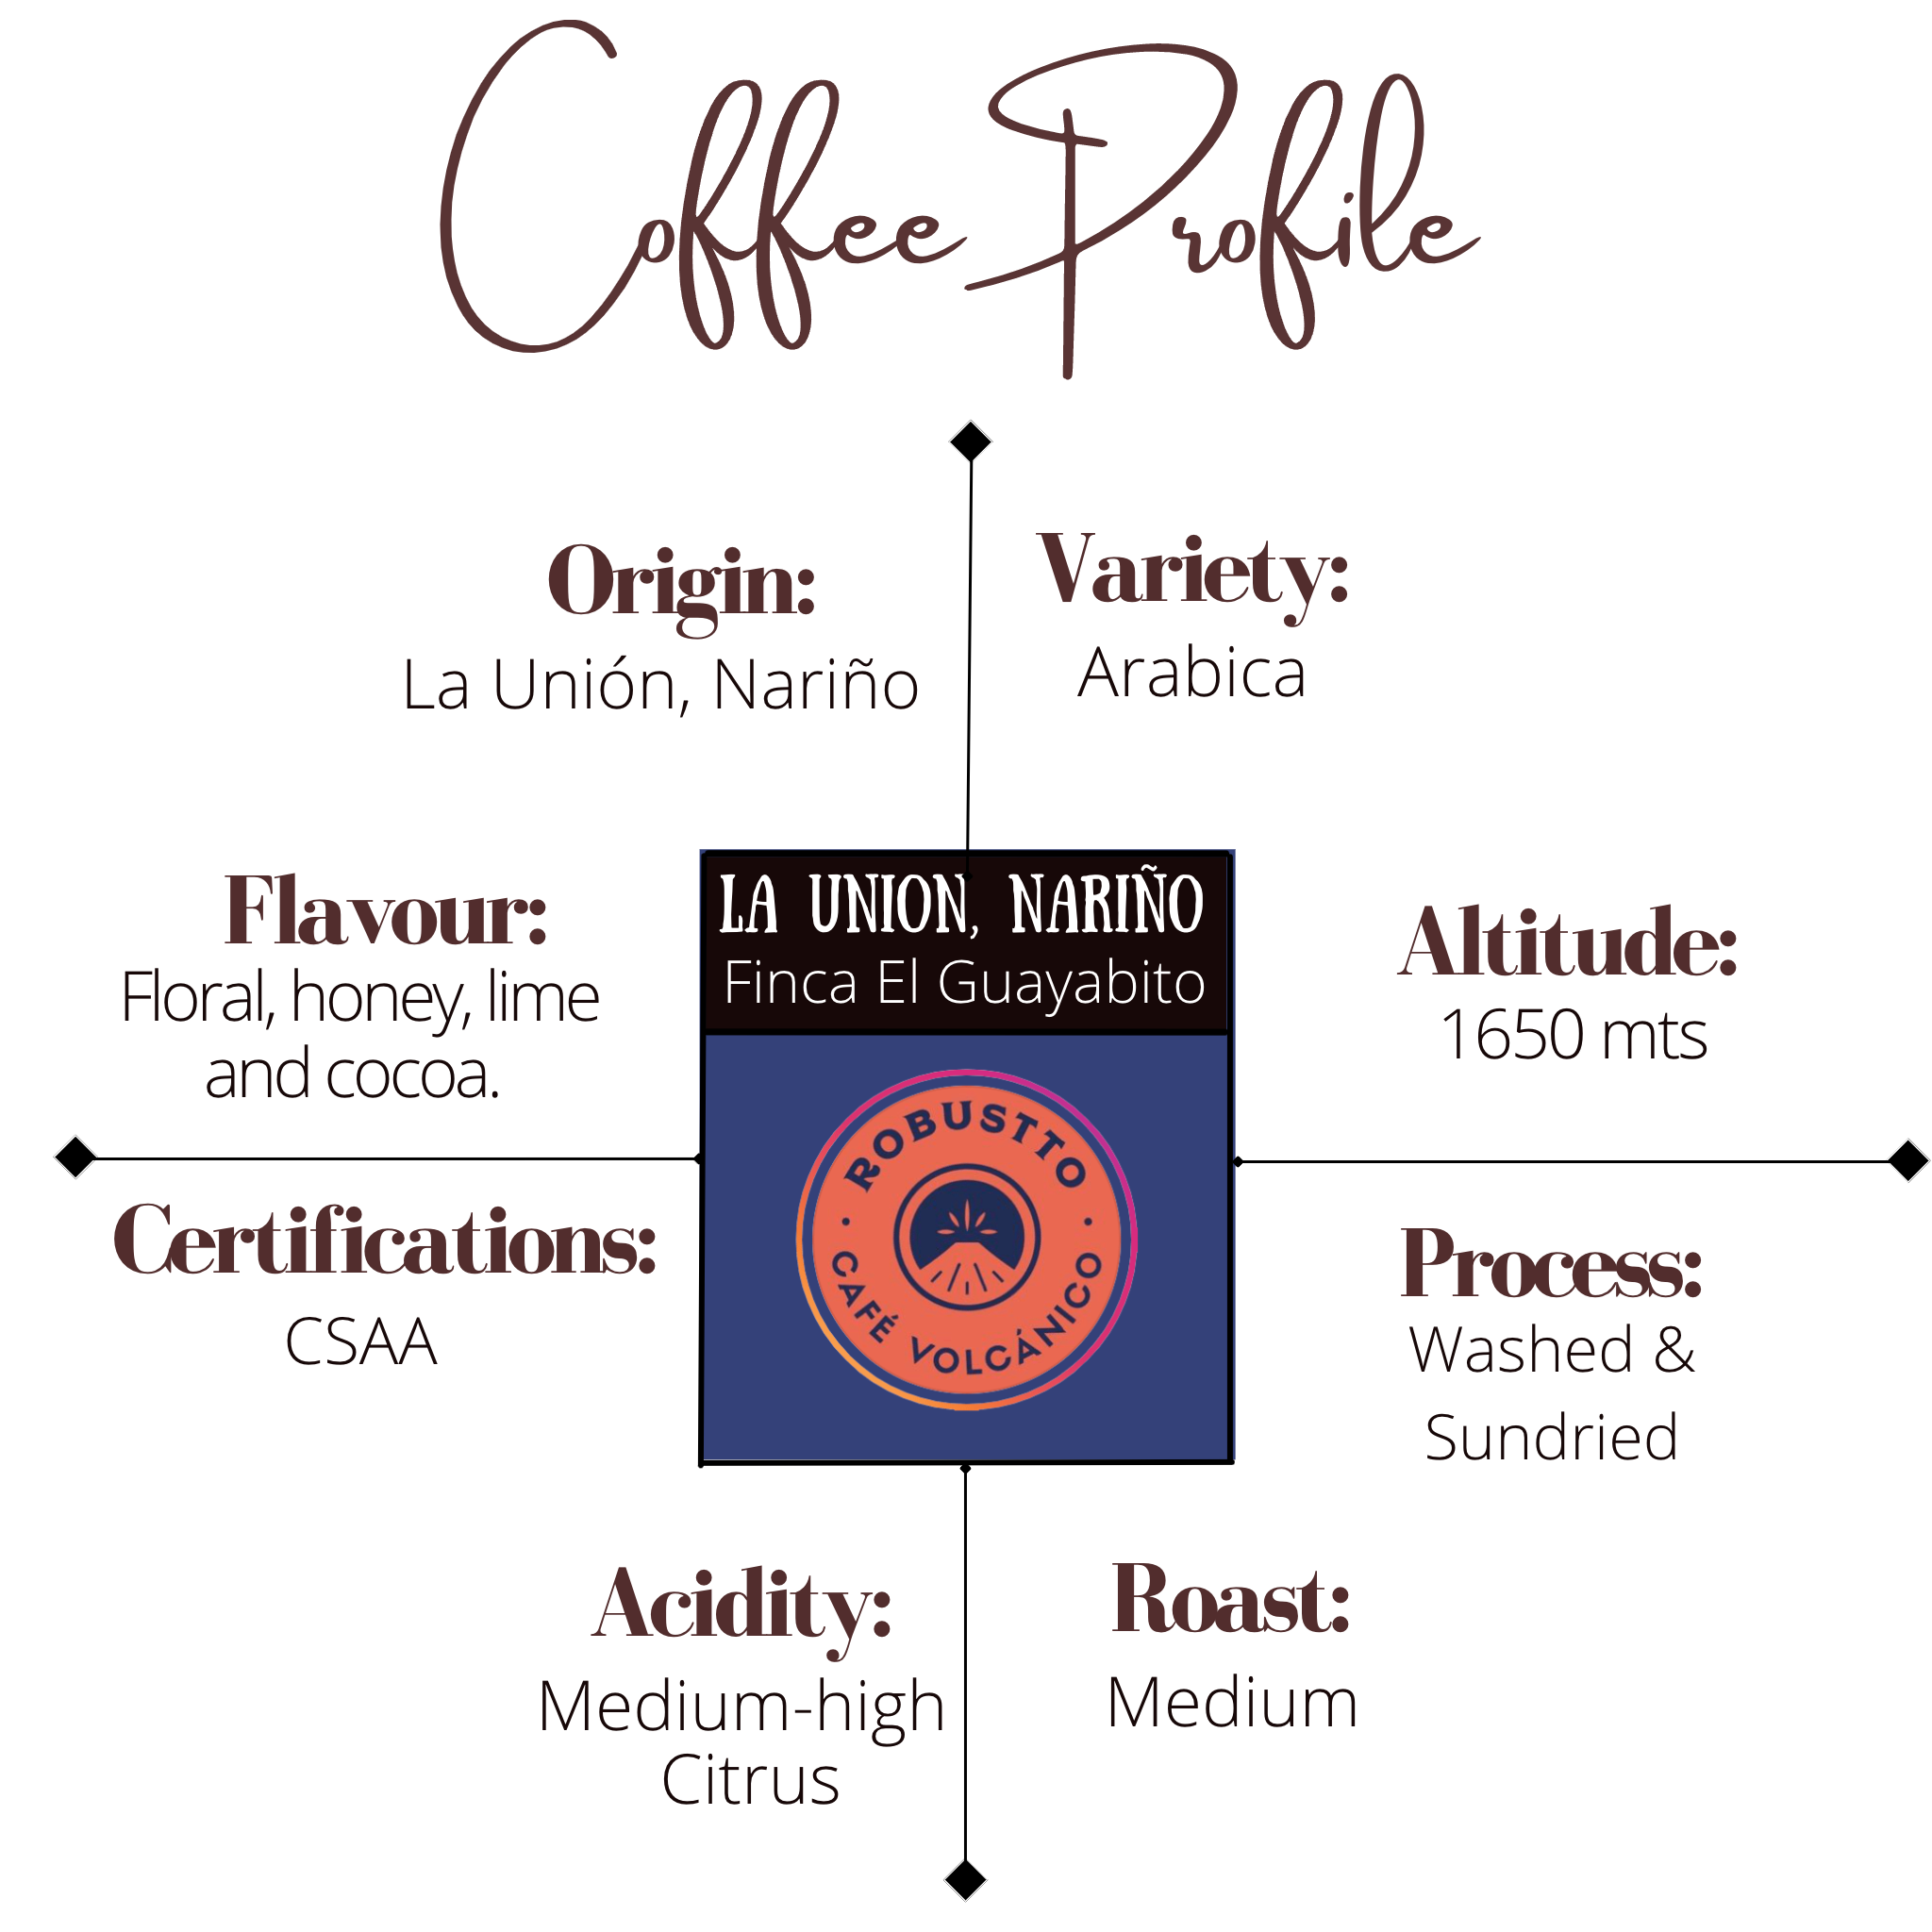 Robustto Specialty Coffee Profile. Find it here at https://CoffeeBeanandBirds.com